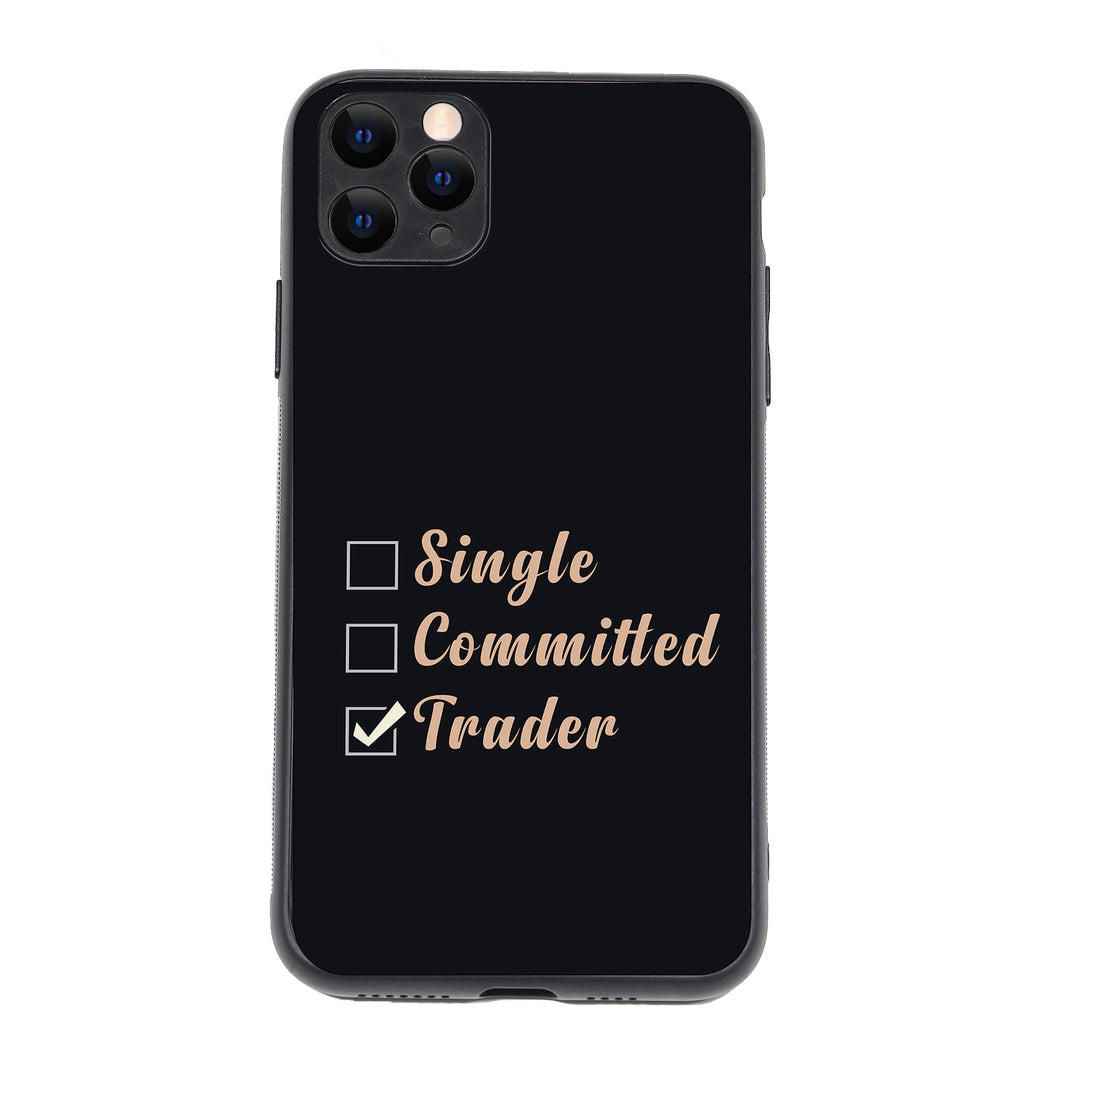 Single, Commited, Trader Trading iPhone 11 Pro Max Case